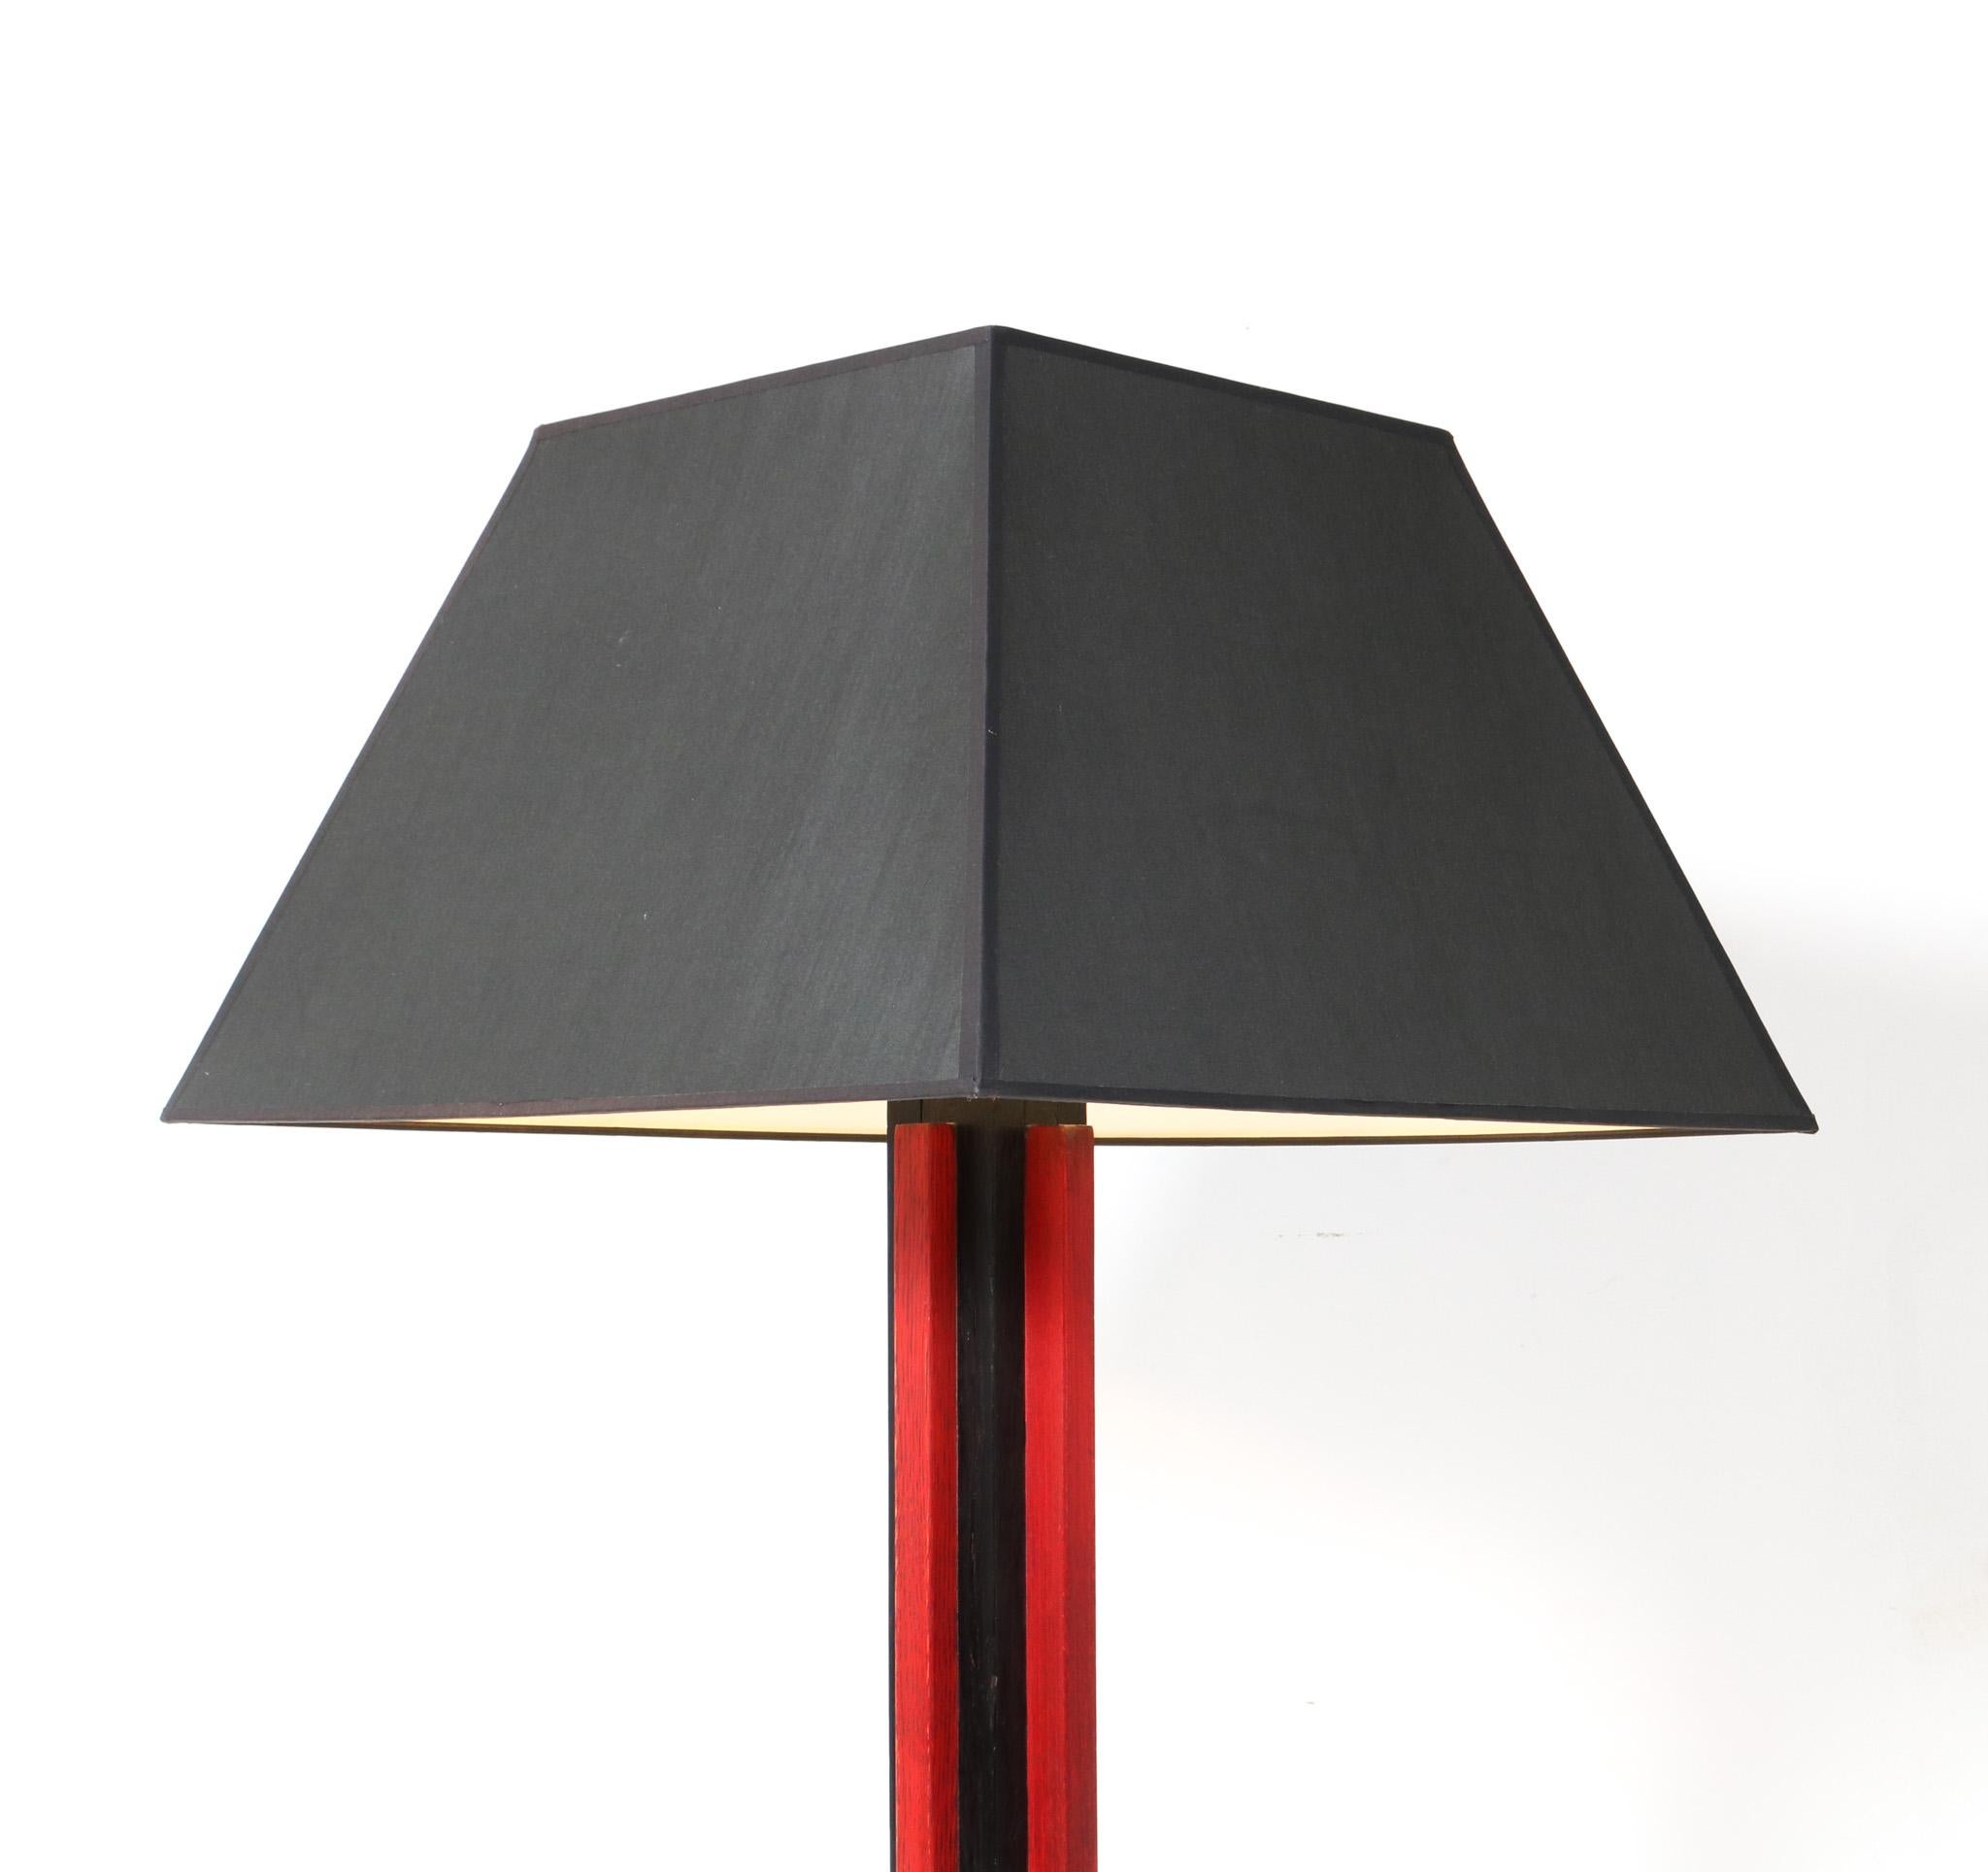 Lacquered Oak Art Deco Modernist Floor Lamp by Cor Alons, 1920s For Sale 2